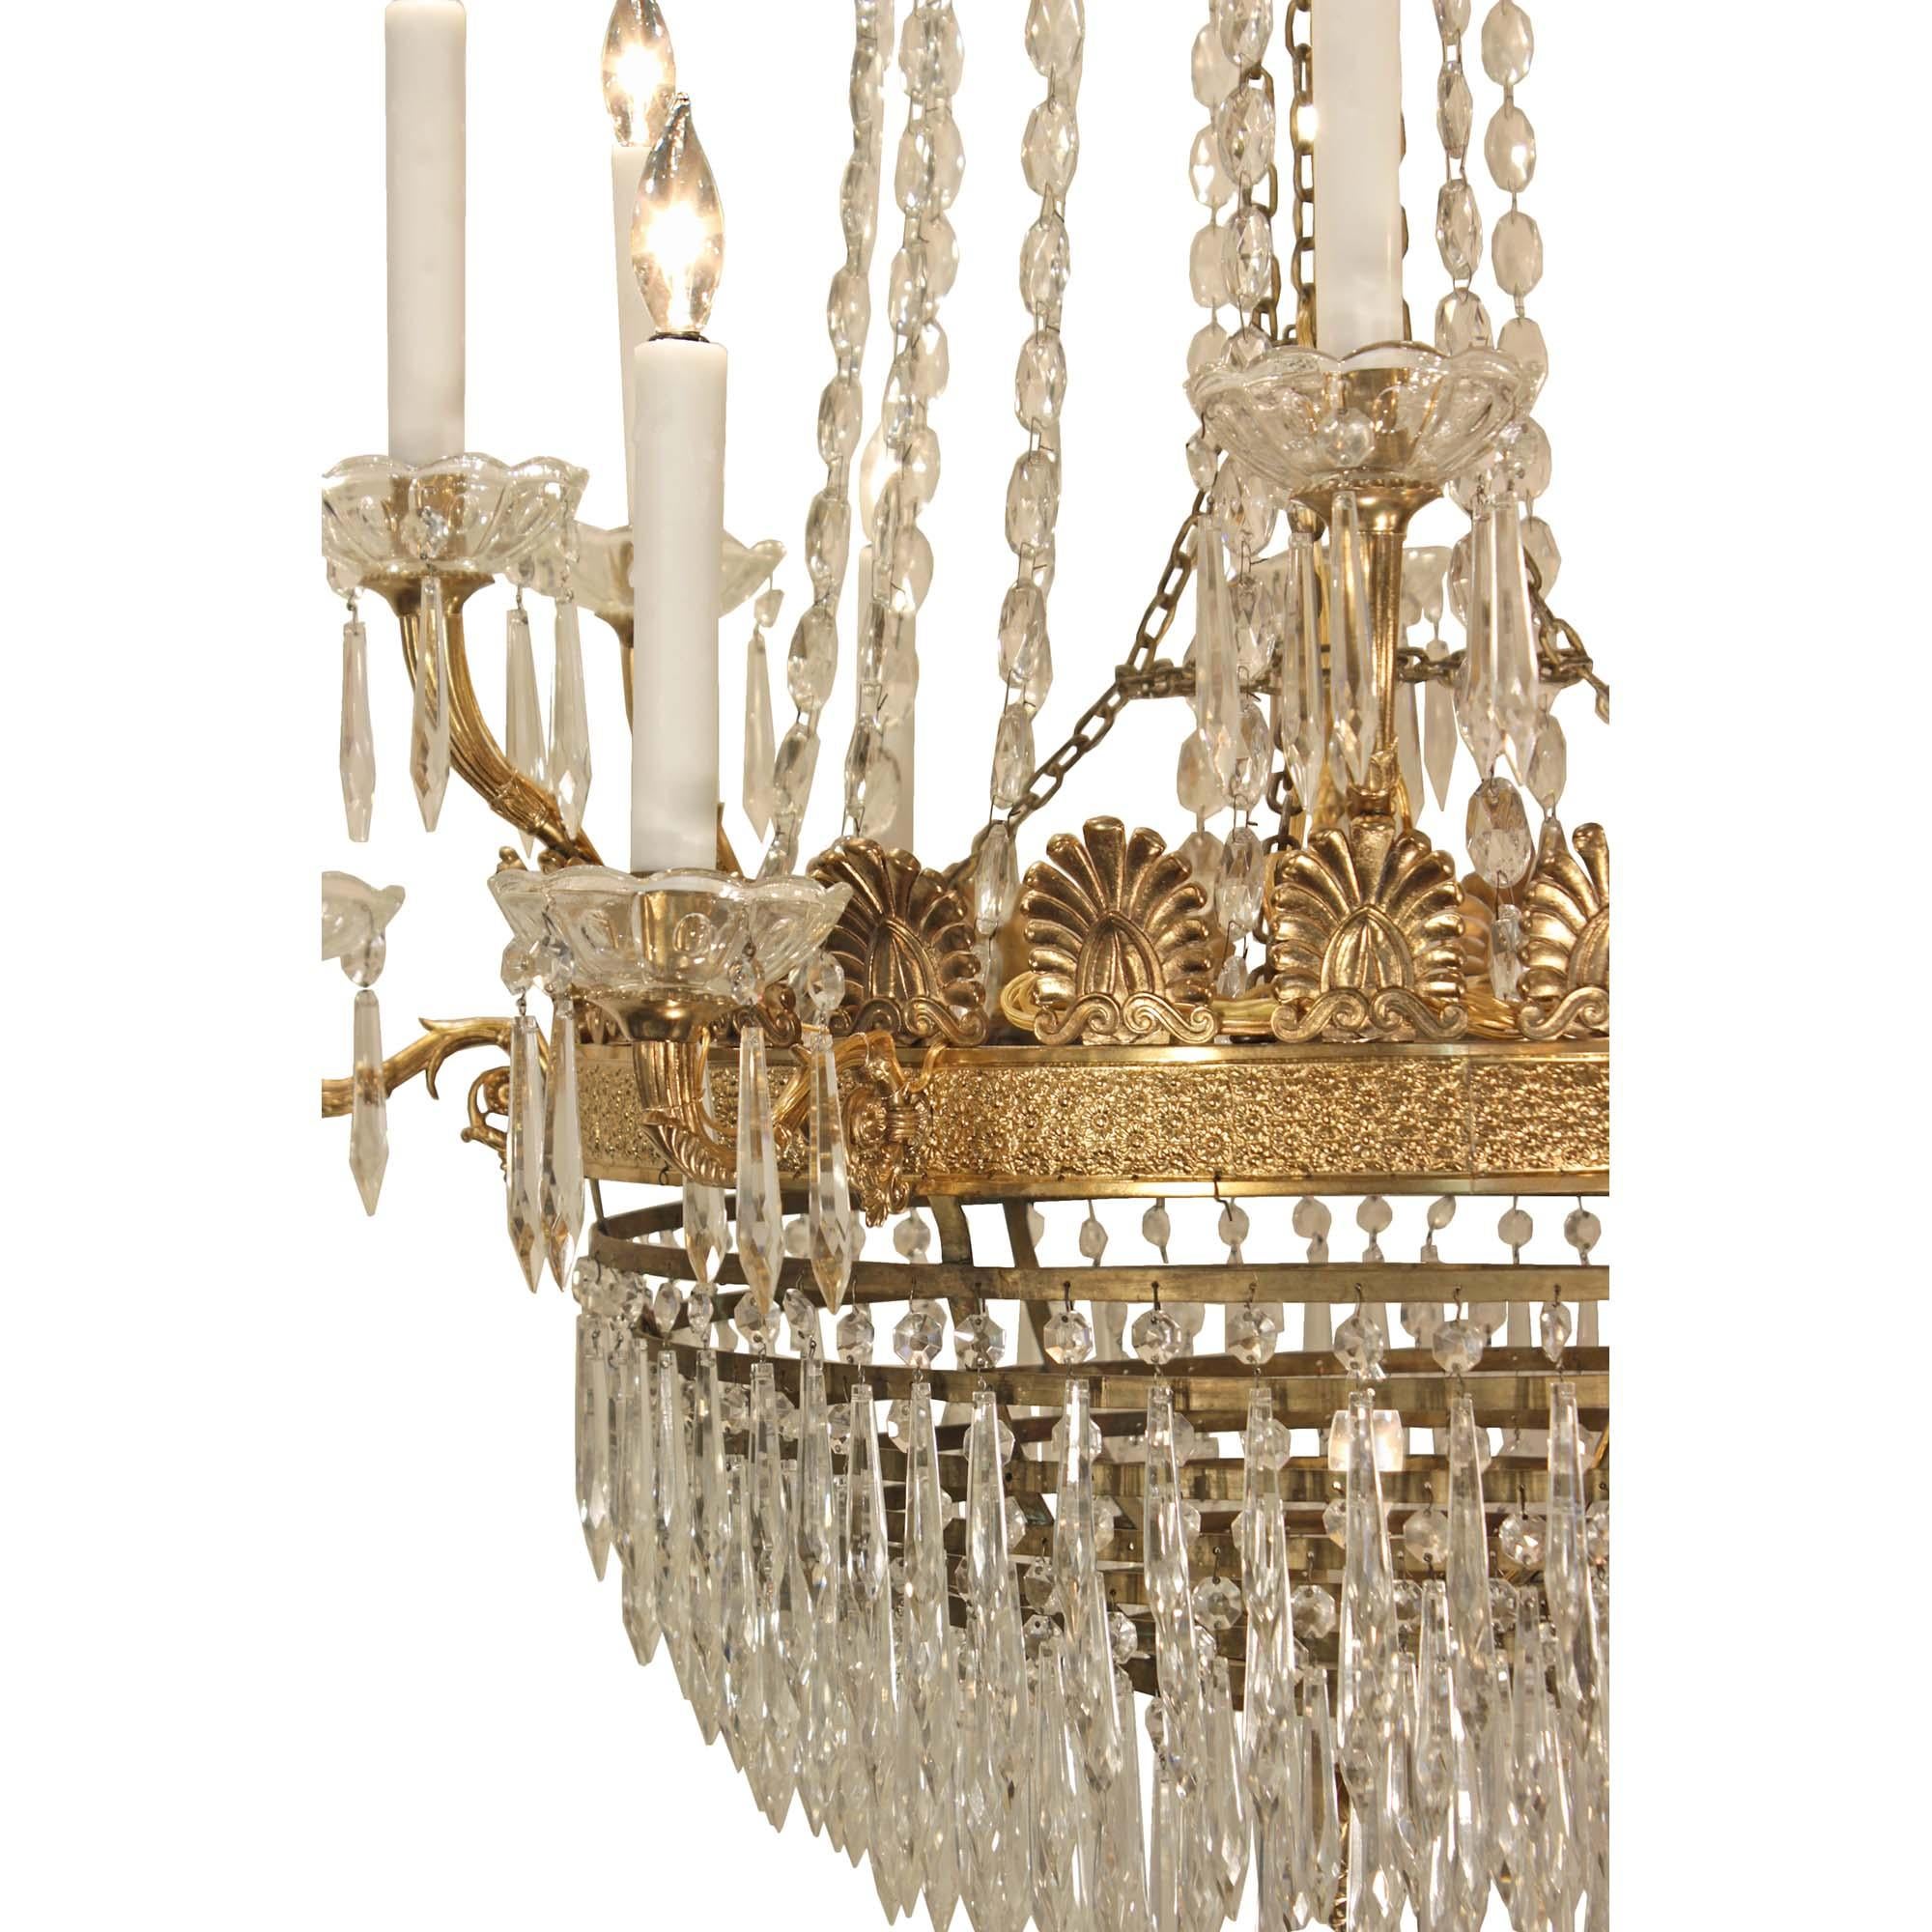 French 19th Century Neoclassical Style Crystal and Ormolu Chandelier In Good Condition For Sale In West Palm Beach, FL